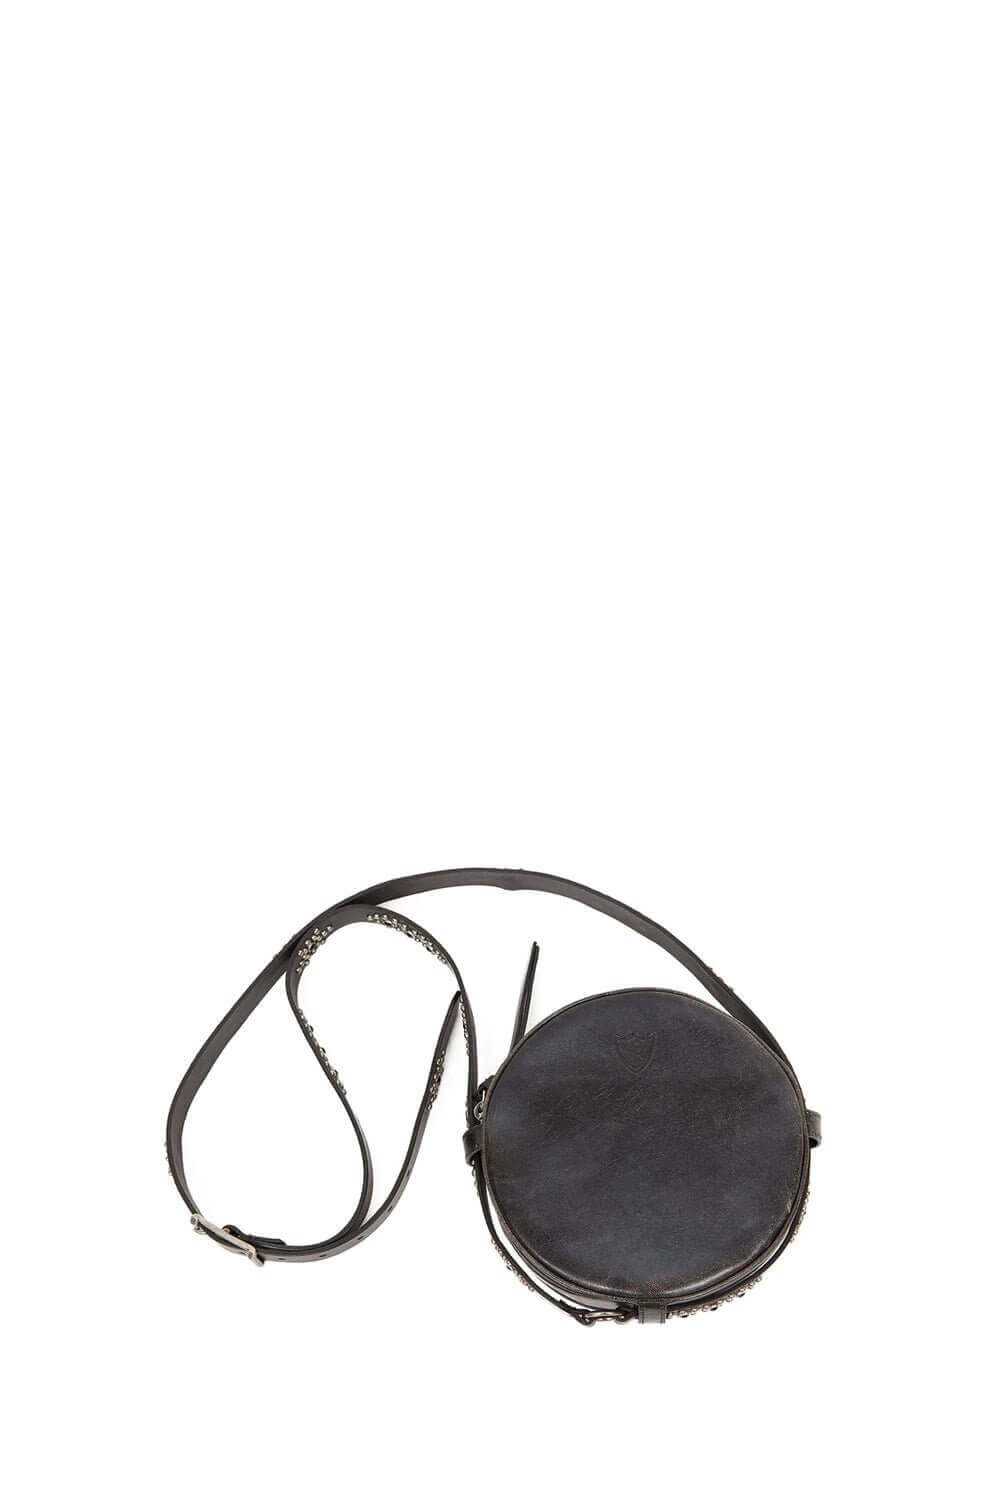 BEBE ROUND BAG Round leather bag with zip closure. Inner lining with two pockets. Studded shoulder strap. Lenght: 18 cm. Height: 18 cm. Depth: 5 cm. Made In Italy. HTC LOS ANGELES